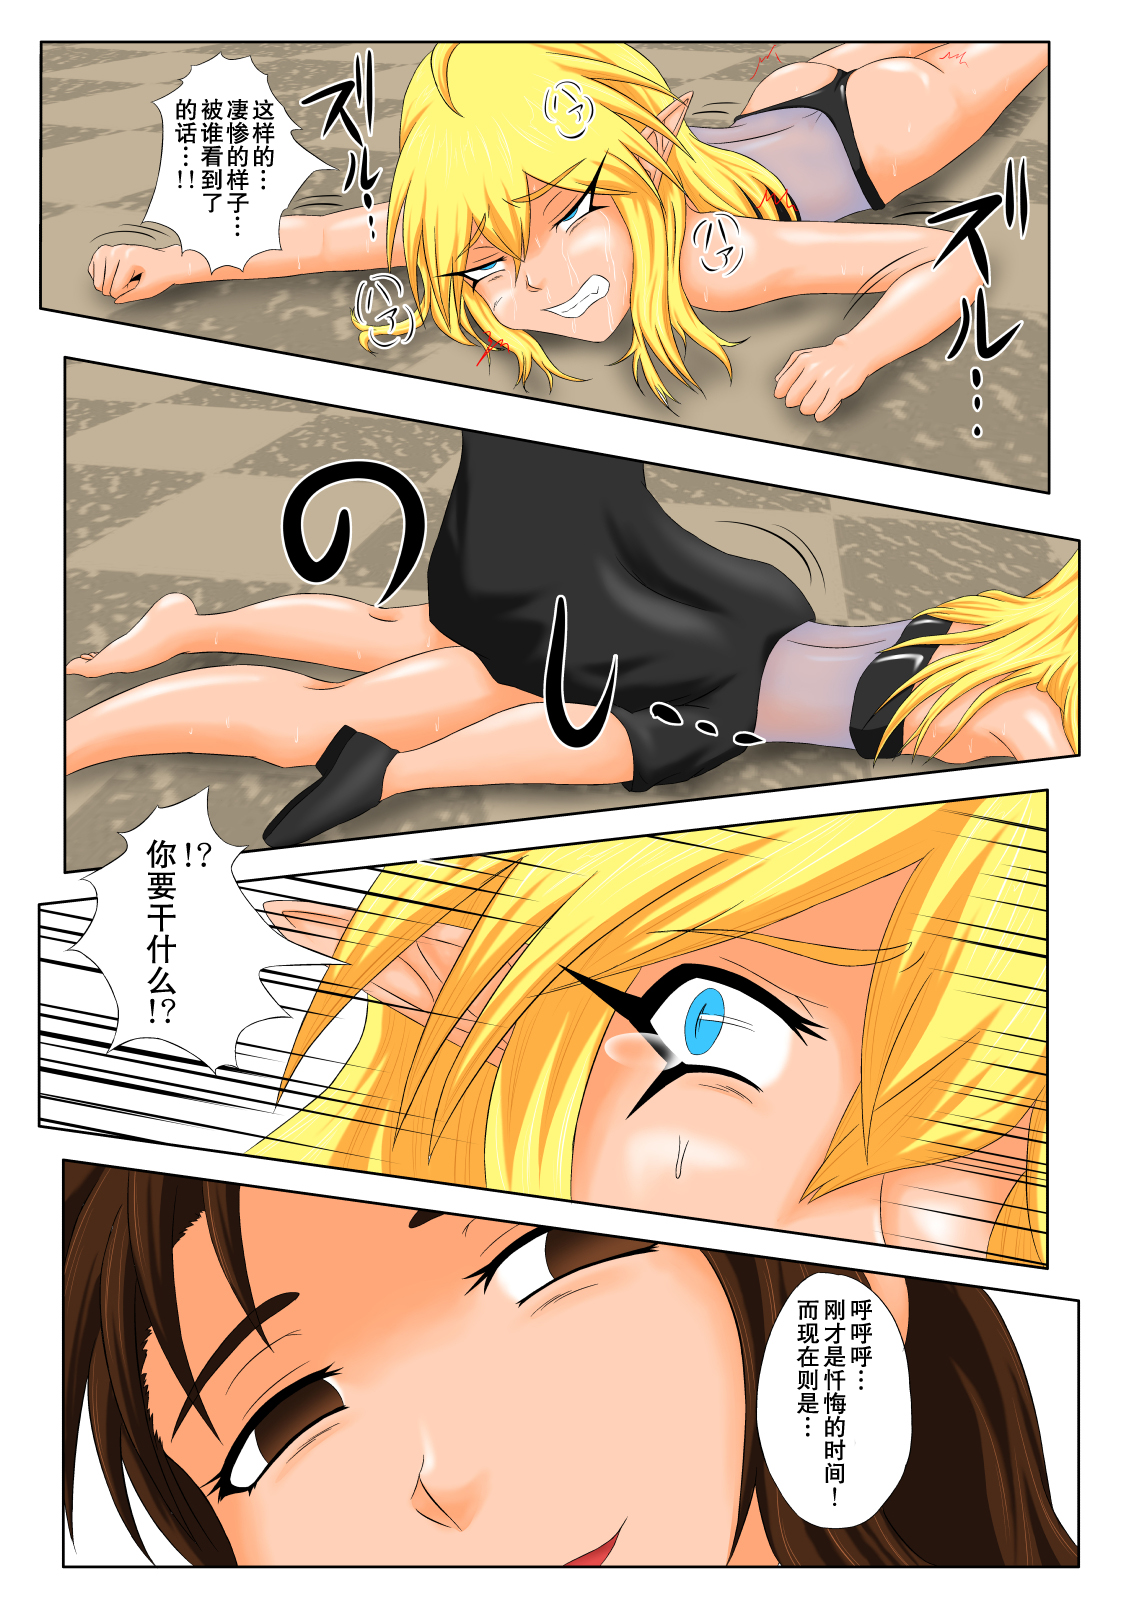 [Tick (Tickzou)] The Tales of Tickling vol.5 [Chinese] [狂笑汉化组] [Digital] page 20 full